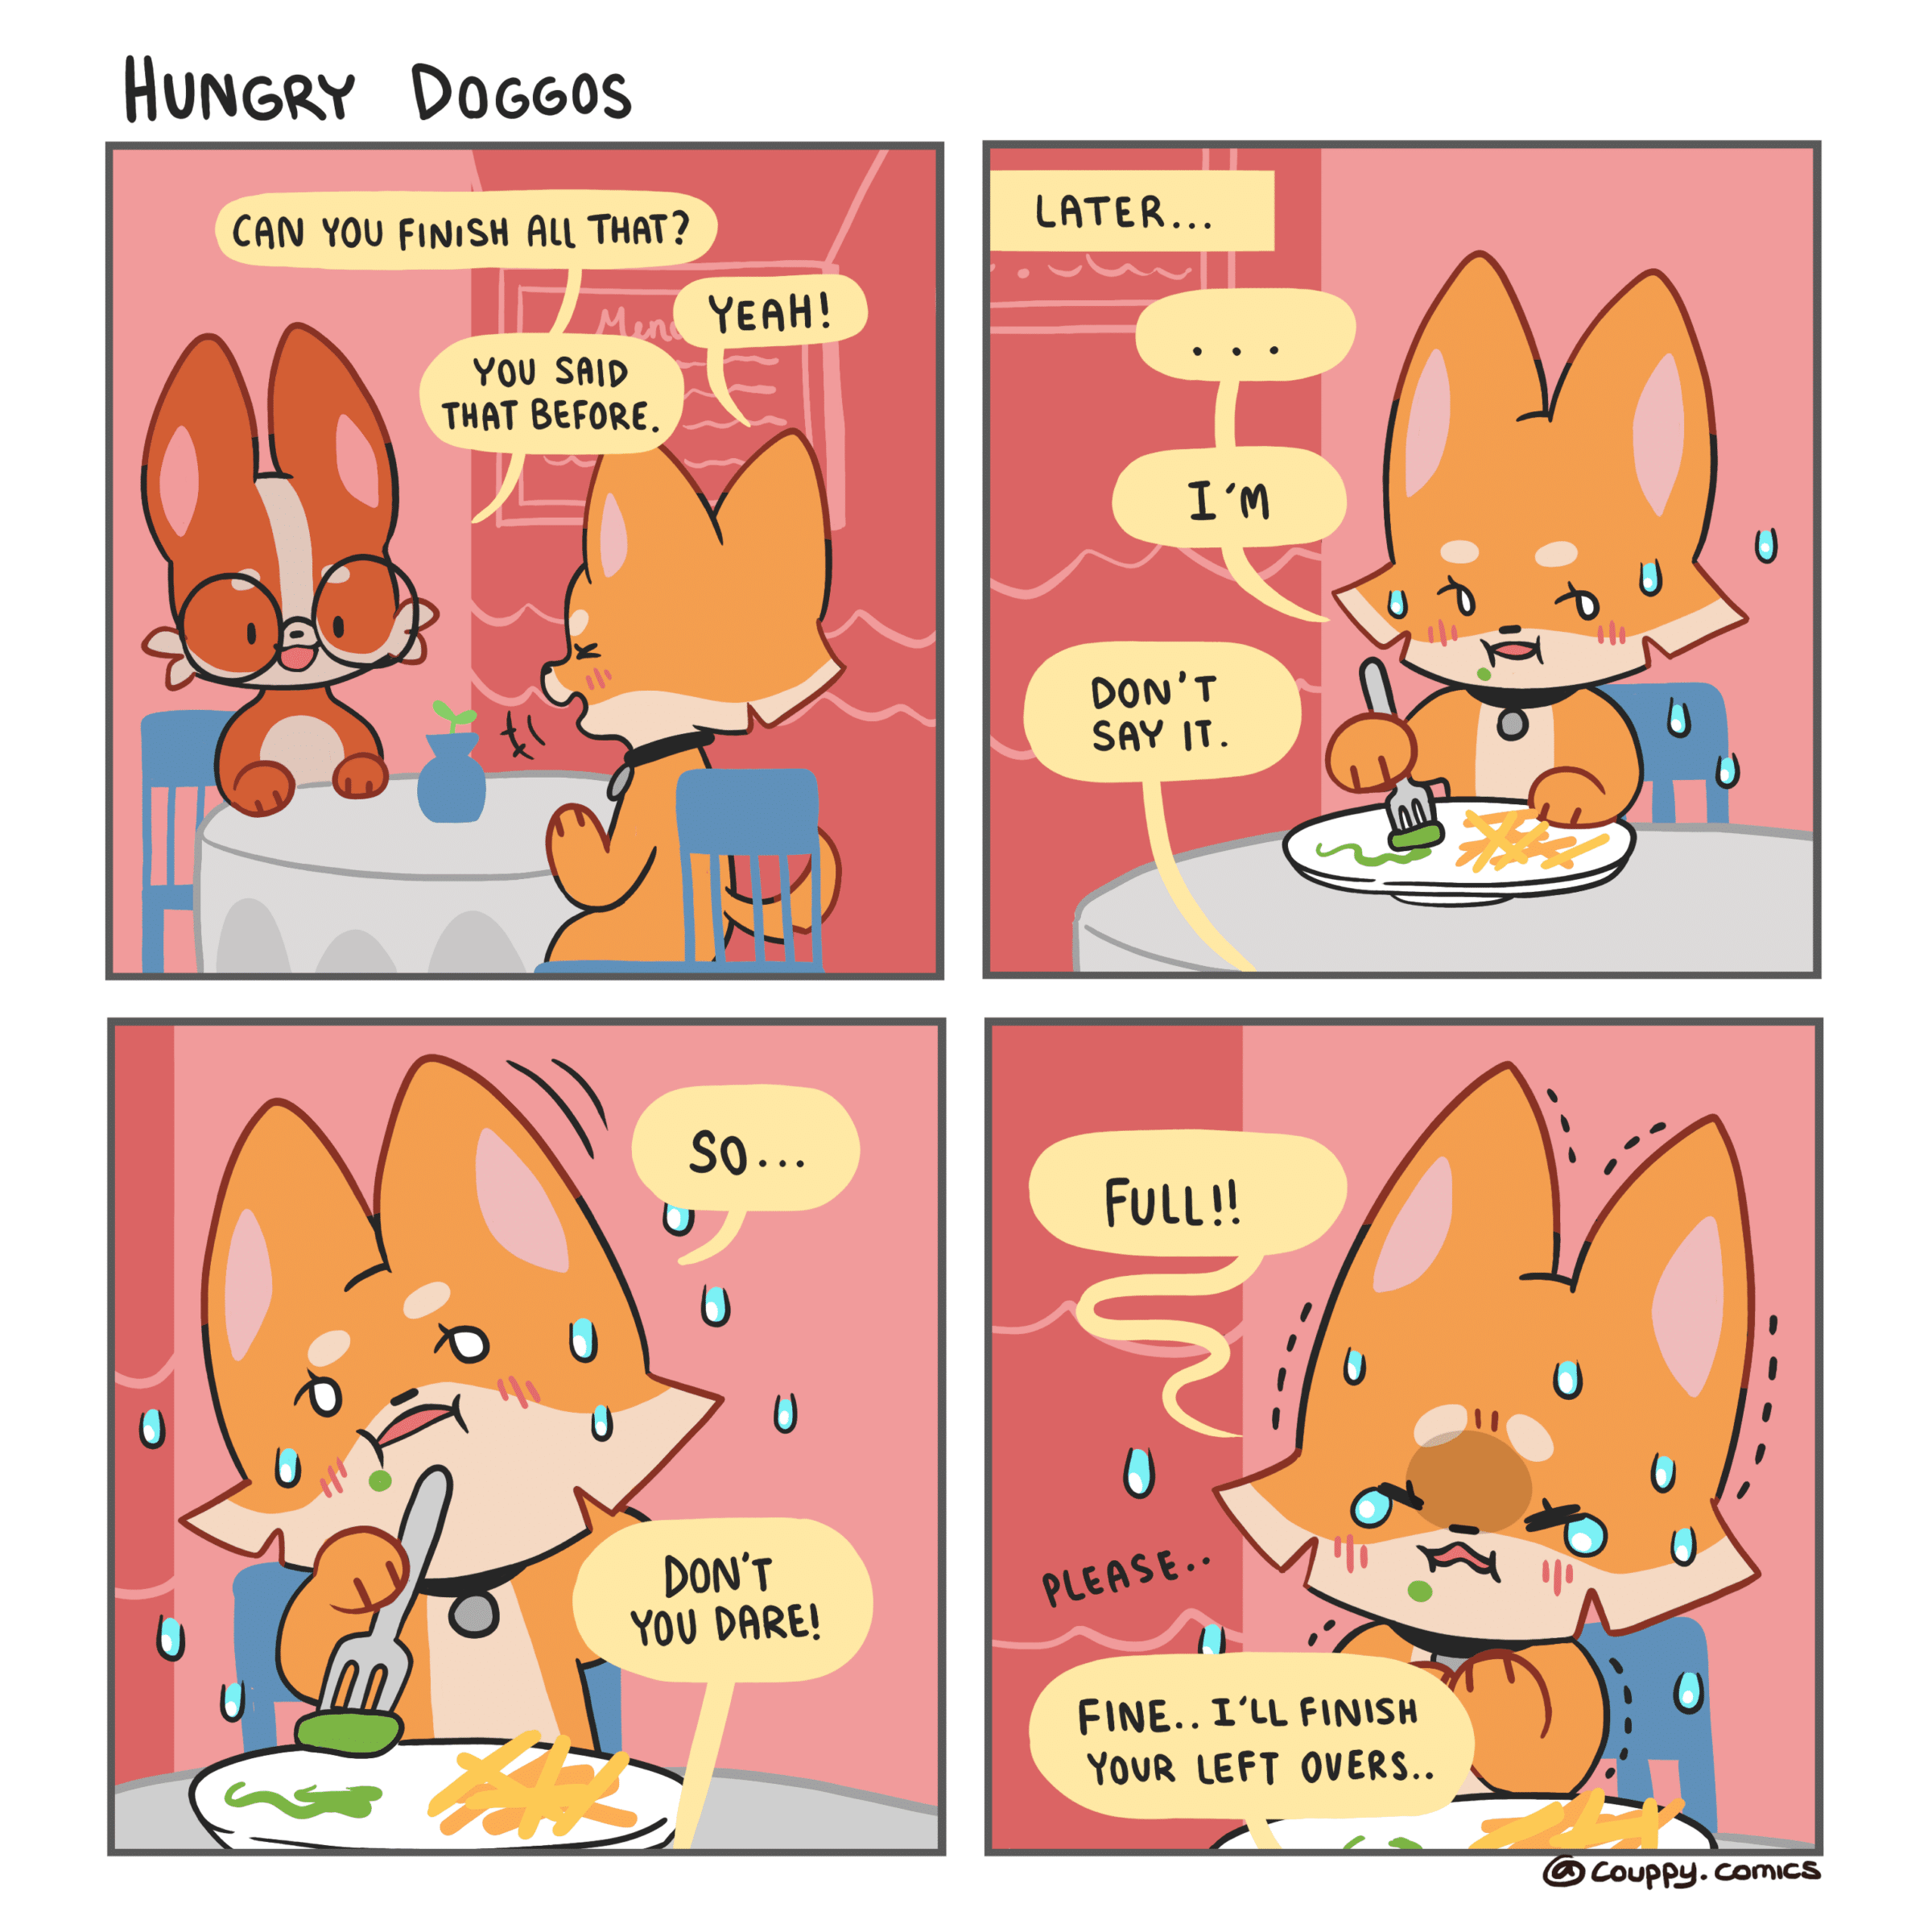 Do you have this habit of over ordering when youre too hungry? (from couppy_comics),  Comics Do you have this habit of over ordering when youre too hungry? (from couppy_comics),  text: HUNGRY Dogos CAN YOU FINISH THAT? YEAH! YOU SRID THAT BEFORE. DON'T YOU LATER... DON'T SAY IT. FINE.. I'LL FINISH LEFT OVERS.. couppy. ComcS 